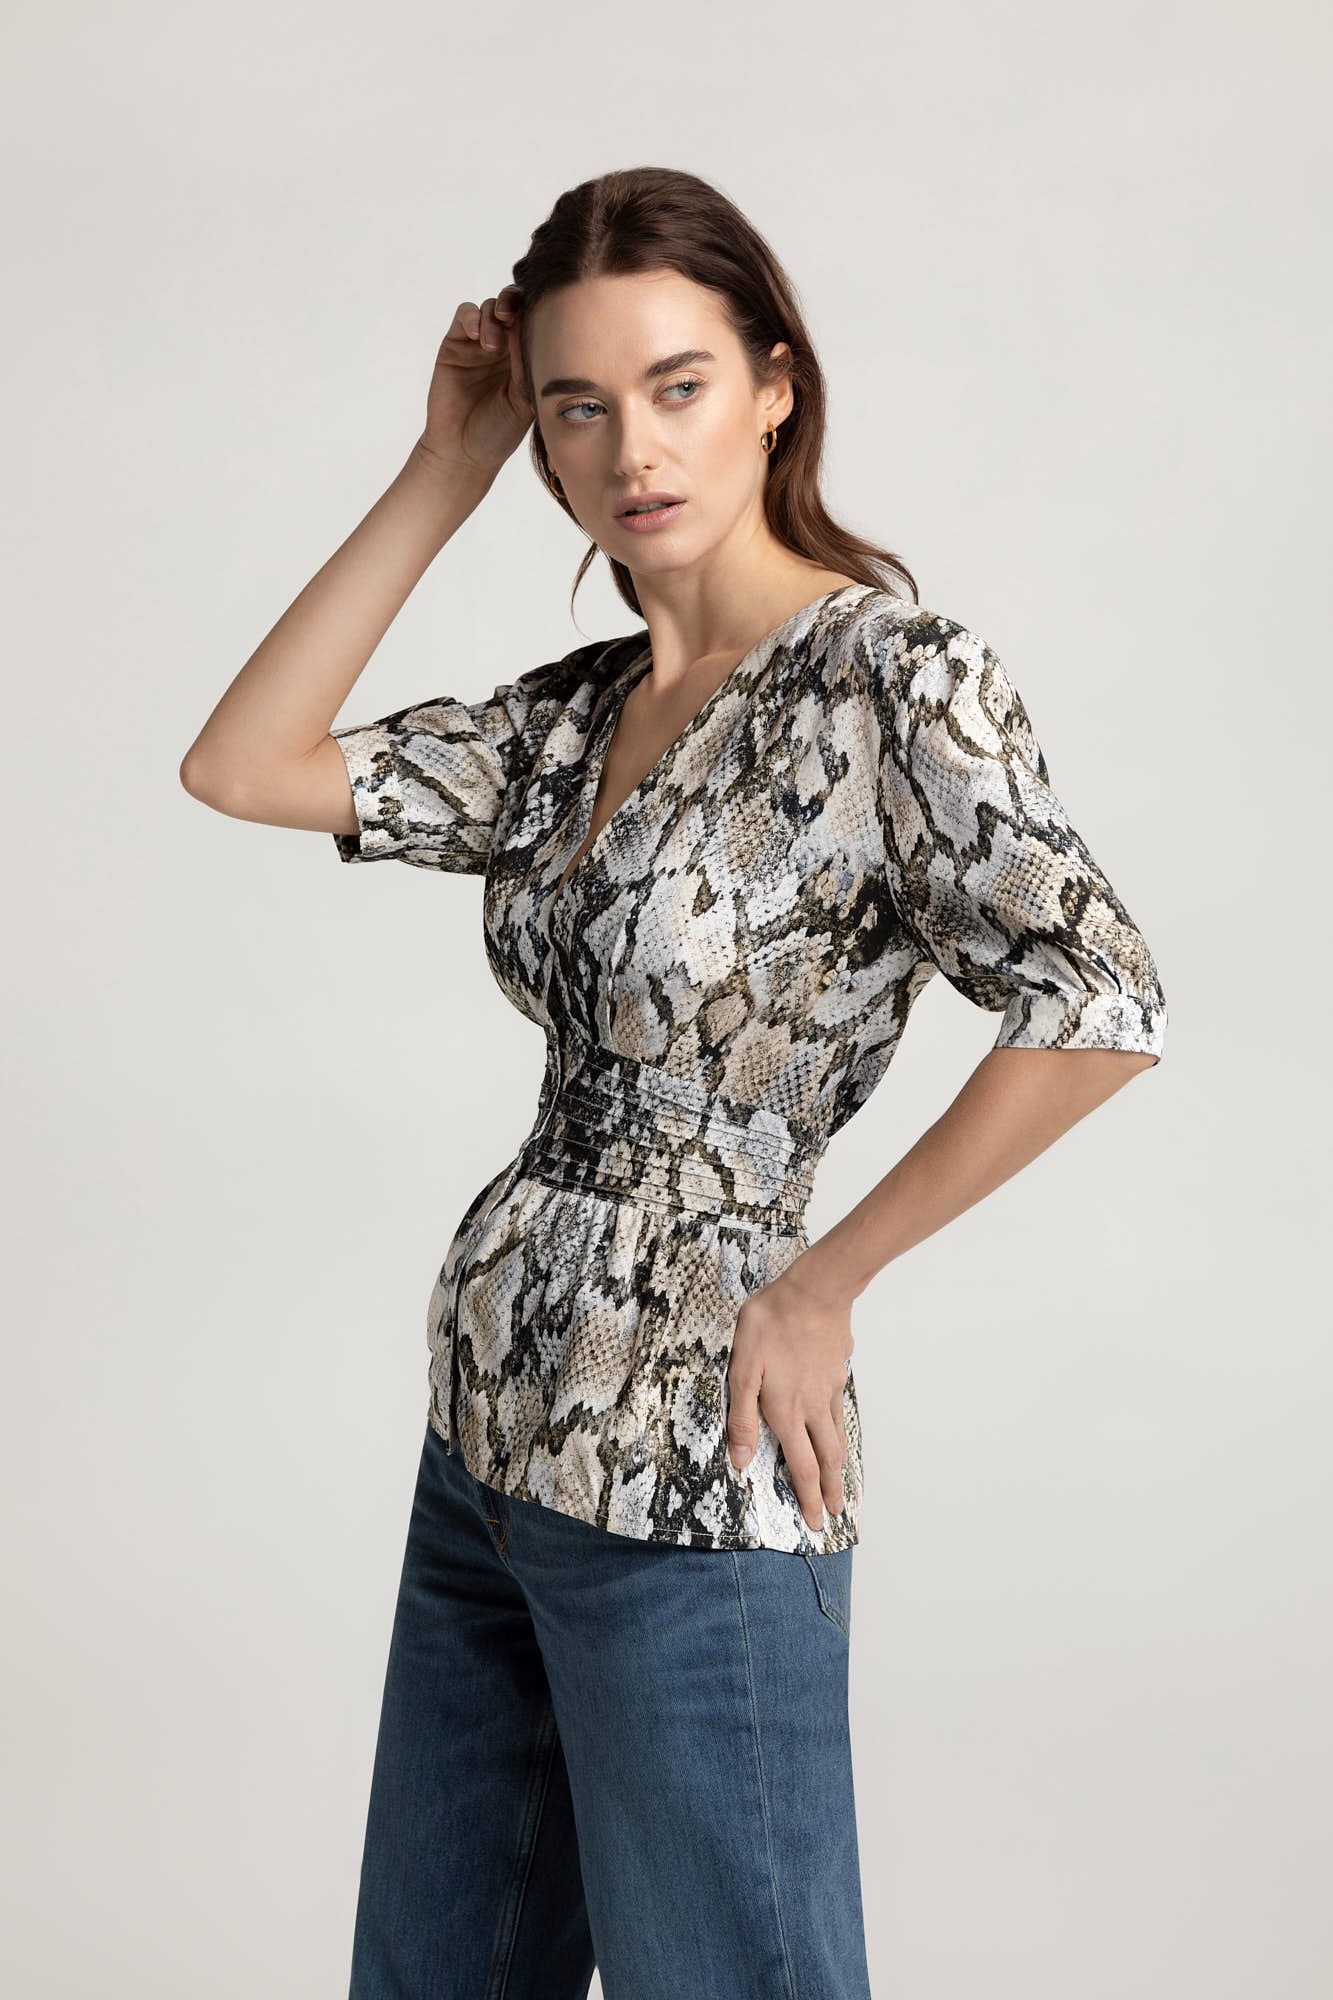 Blouse LILLMOR in animal print by LOVJOI made from Ecovero™